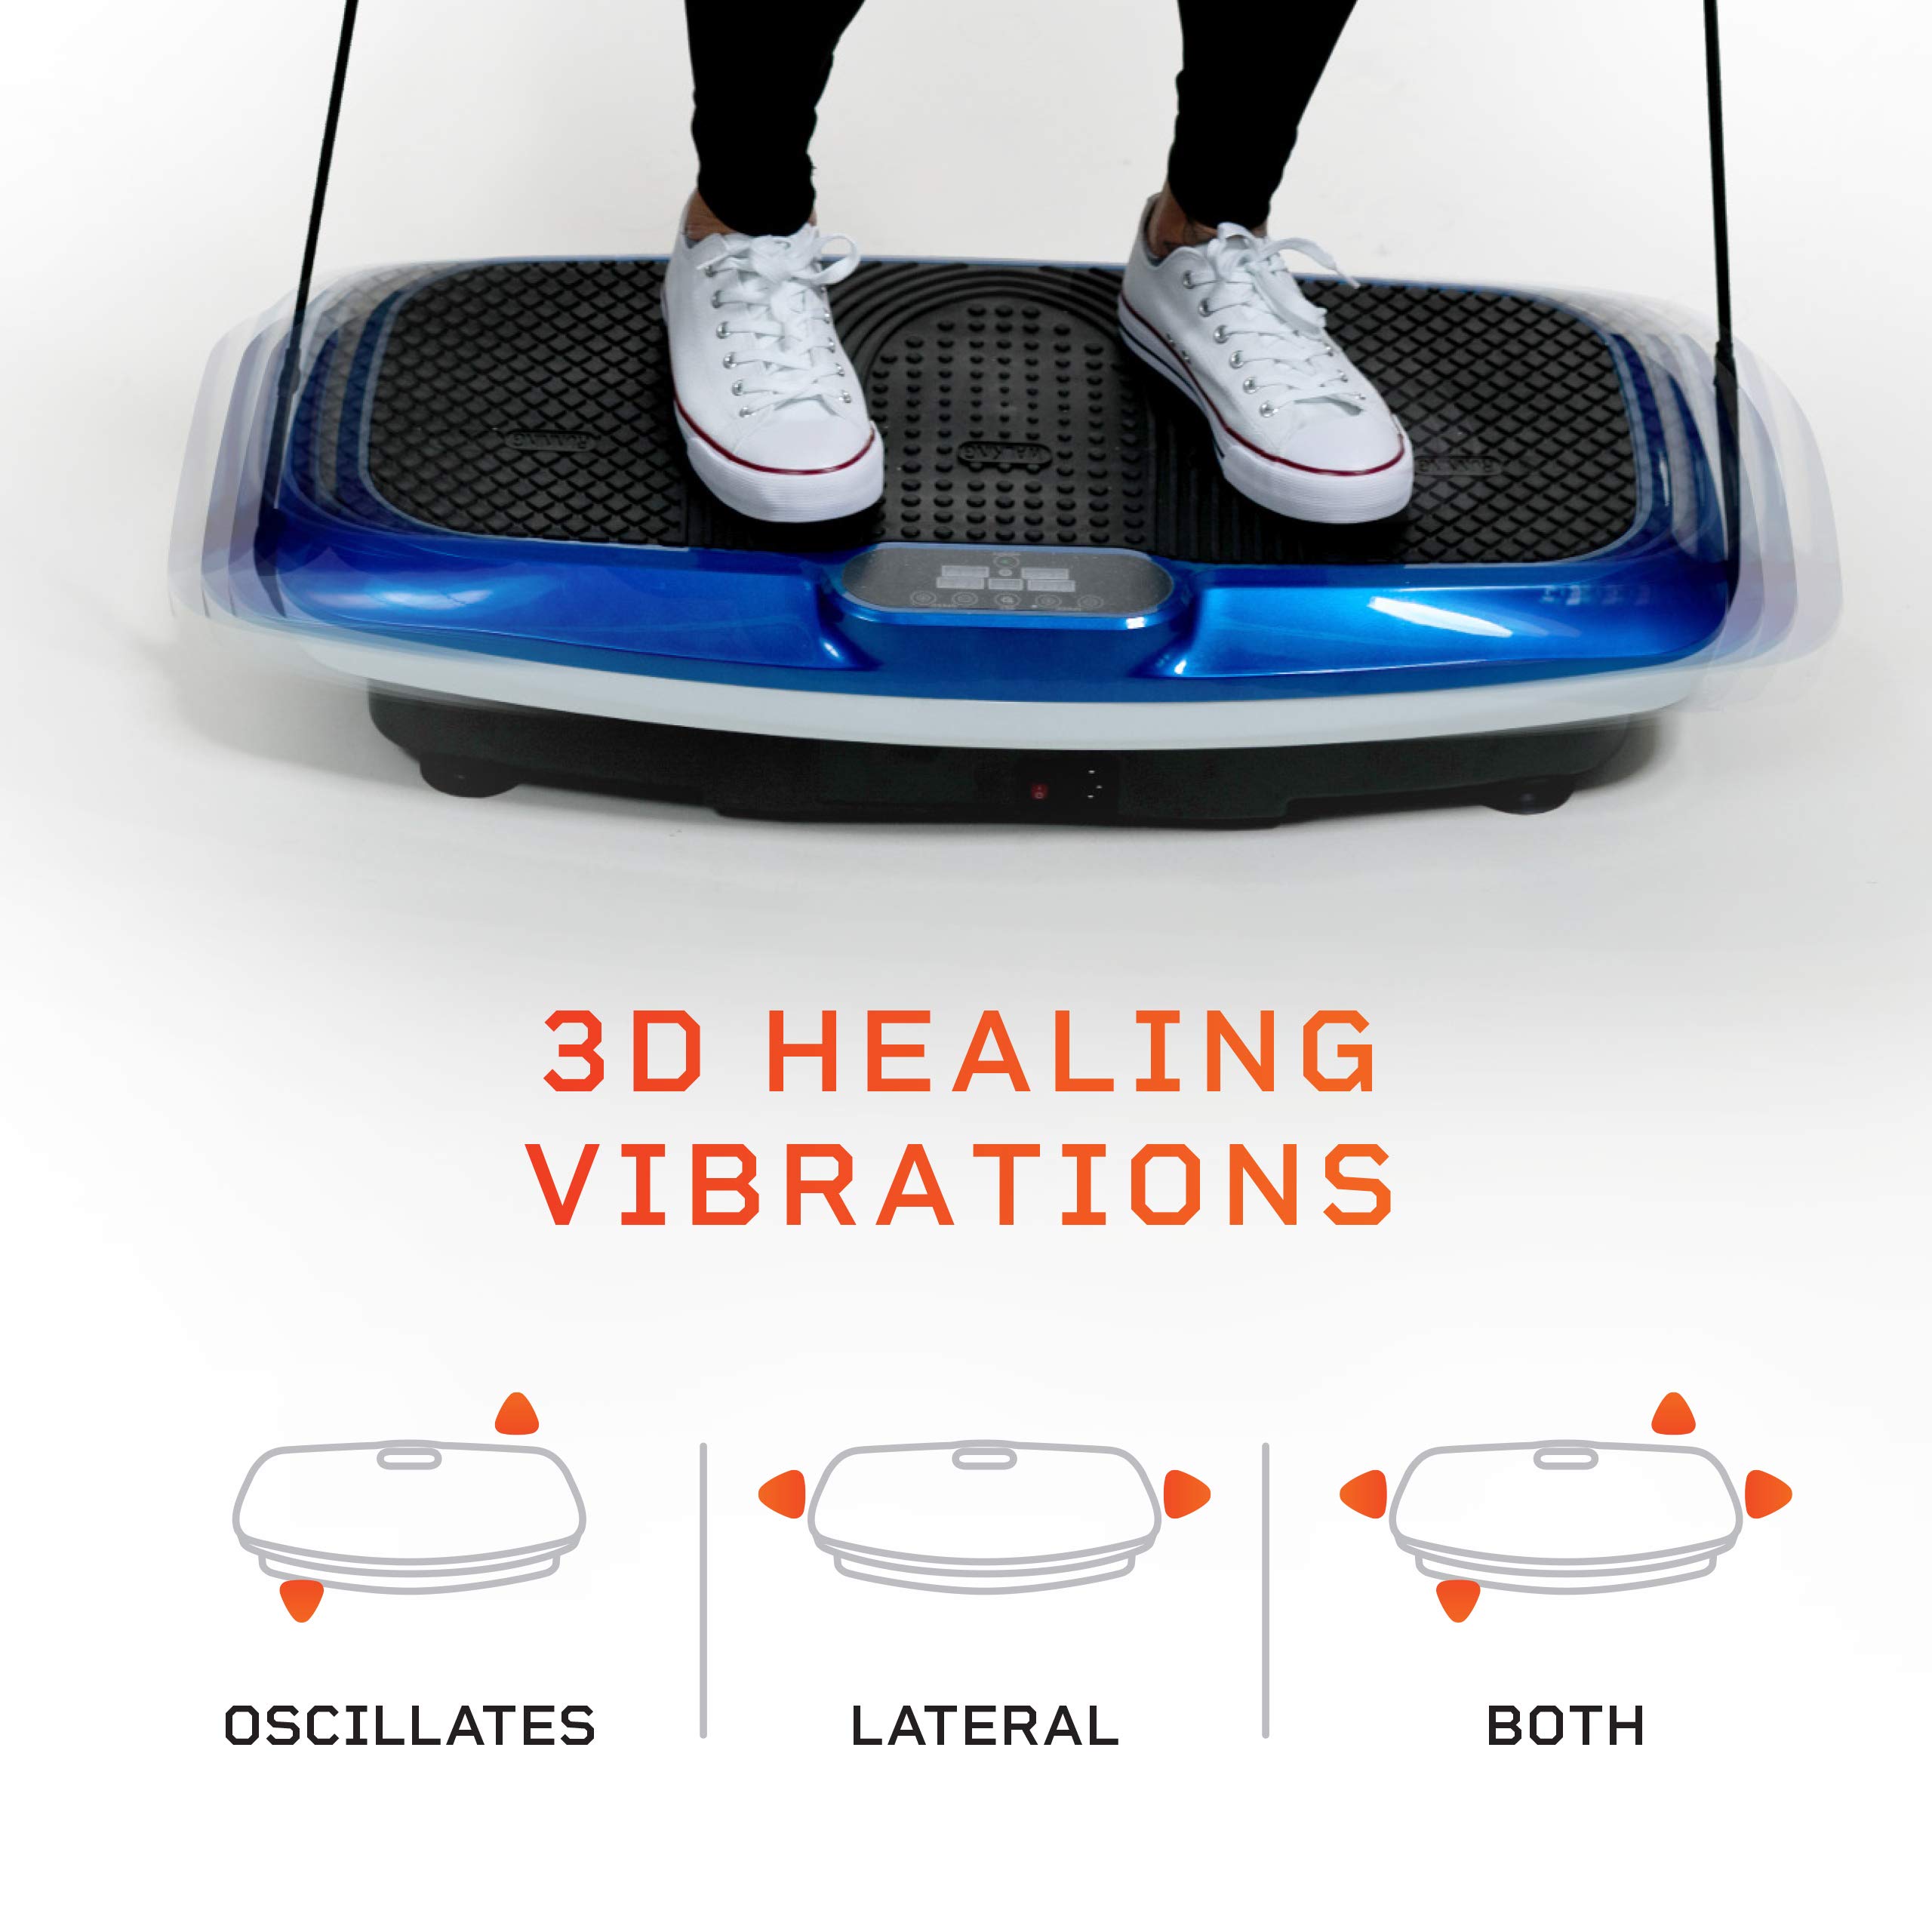 LifePro Hovert 3D Vibration Plate Machine - Dual Motor Oscillation, Lateral + 3D Motion Viberation Platform Machine - Full Whole Body Vibrarating Machine for Home Exercise & Fitness